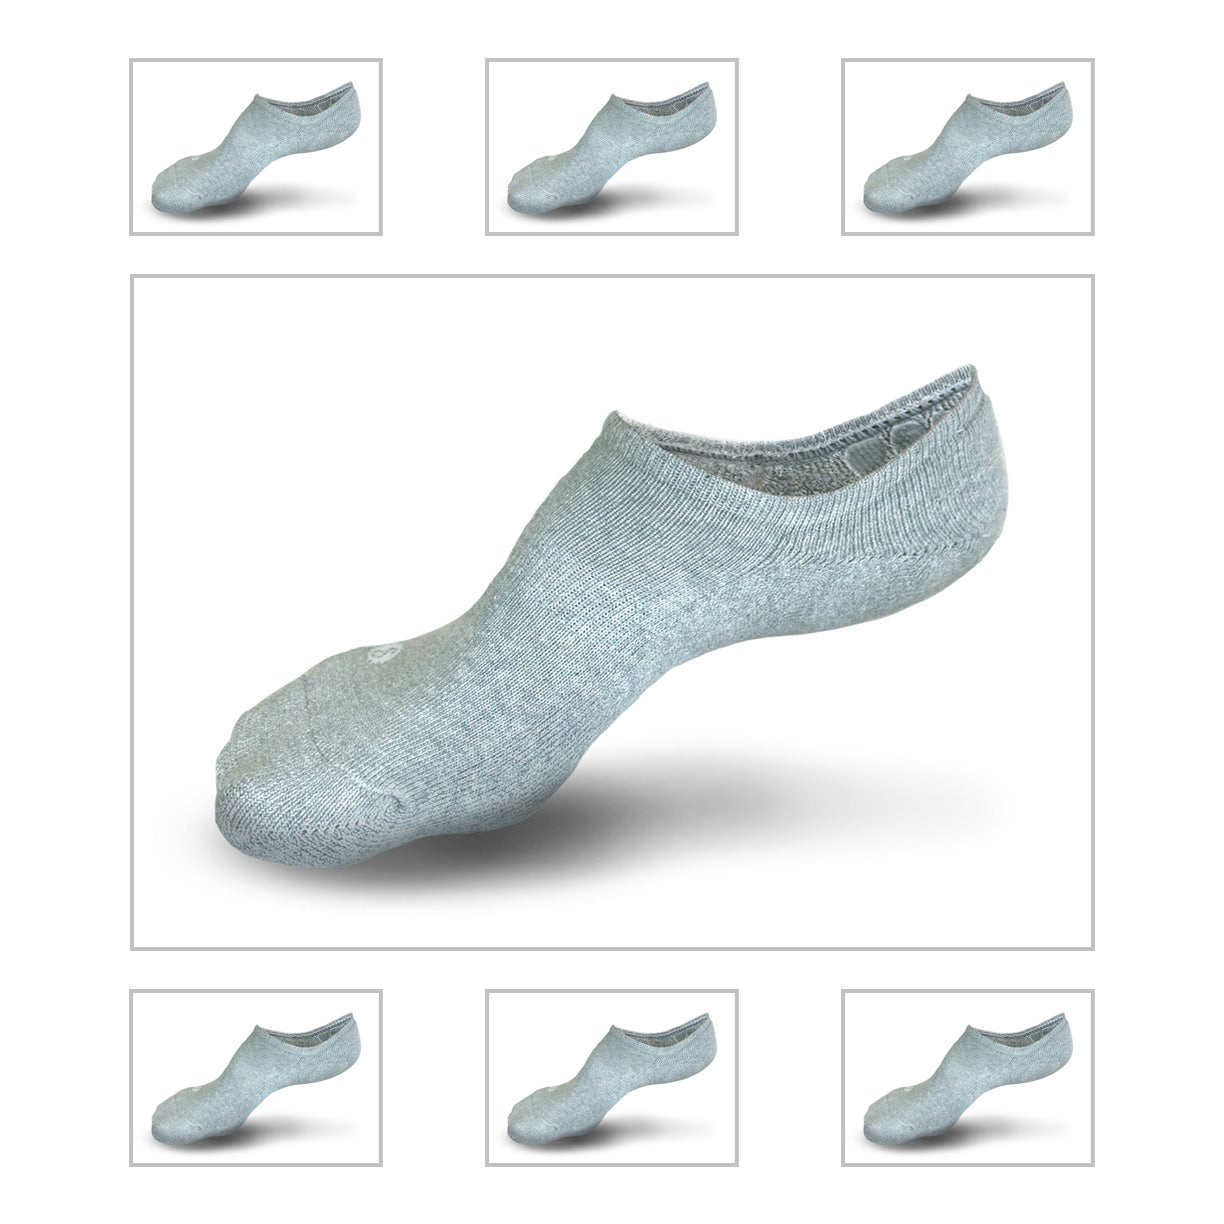 Photorealistic illustration of Skinnys Performance padded-heel sock (duplicated 7 times) on an invisible foot revealing the fit